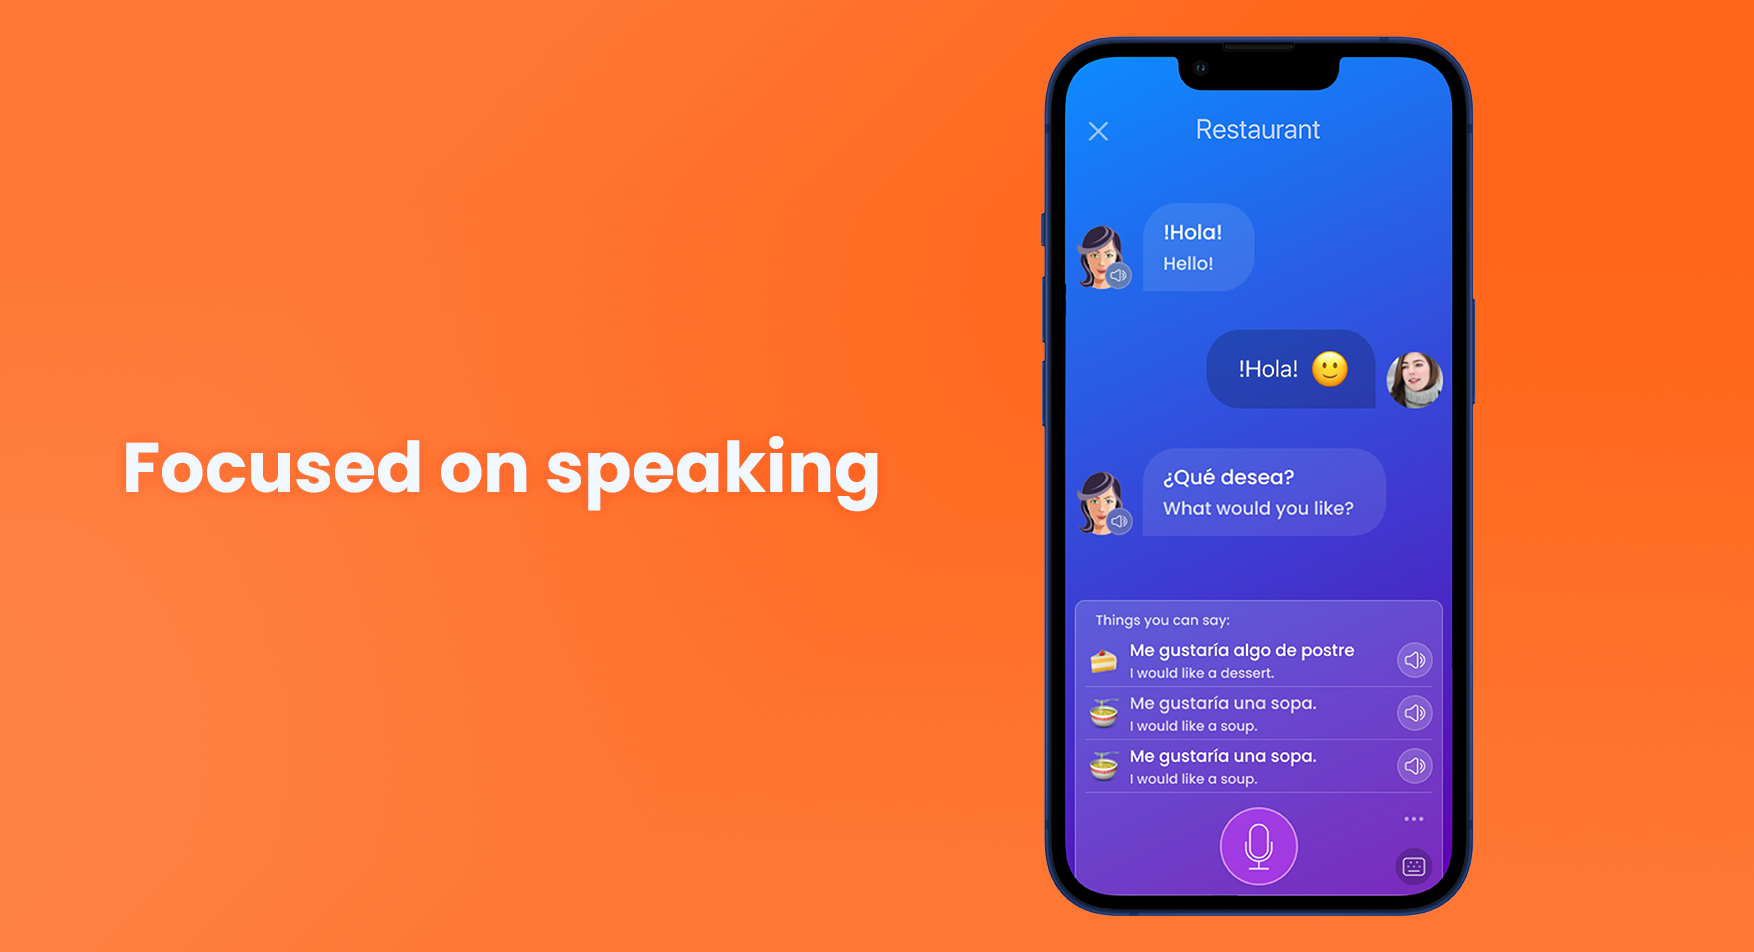 Once you’ve learned new words, you can practice using them in conversation. Using speech recognition, the chatbot will provide feedback on your pronunciation, and will help you with suggestions. Perfect for your journey to fluency!